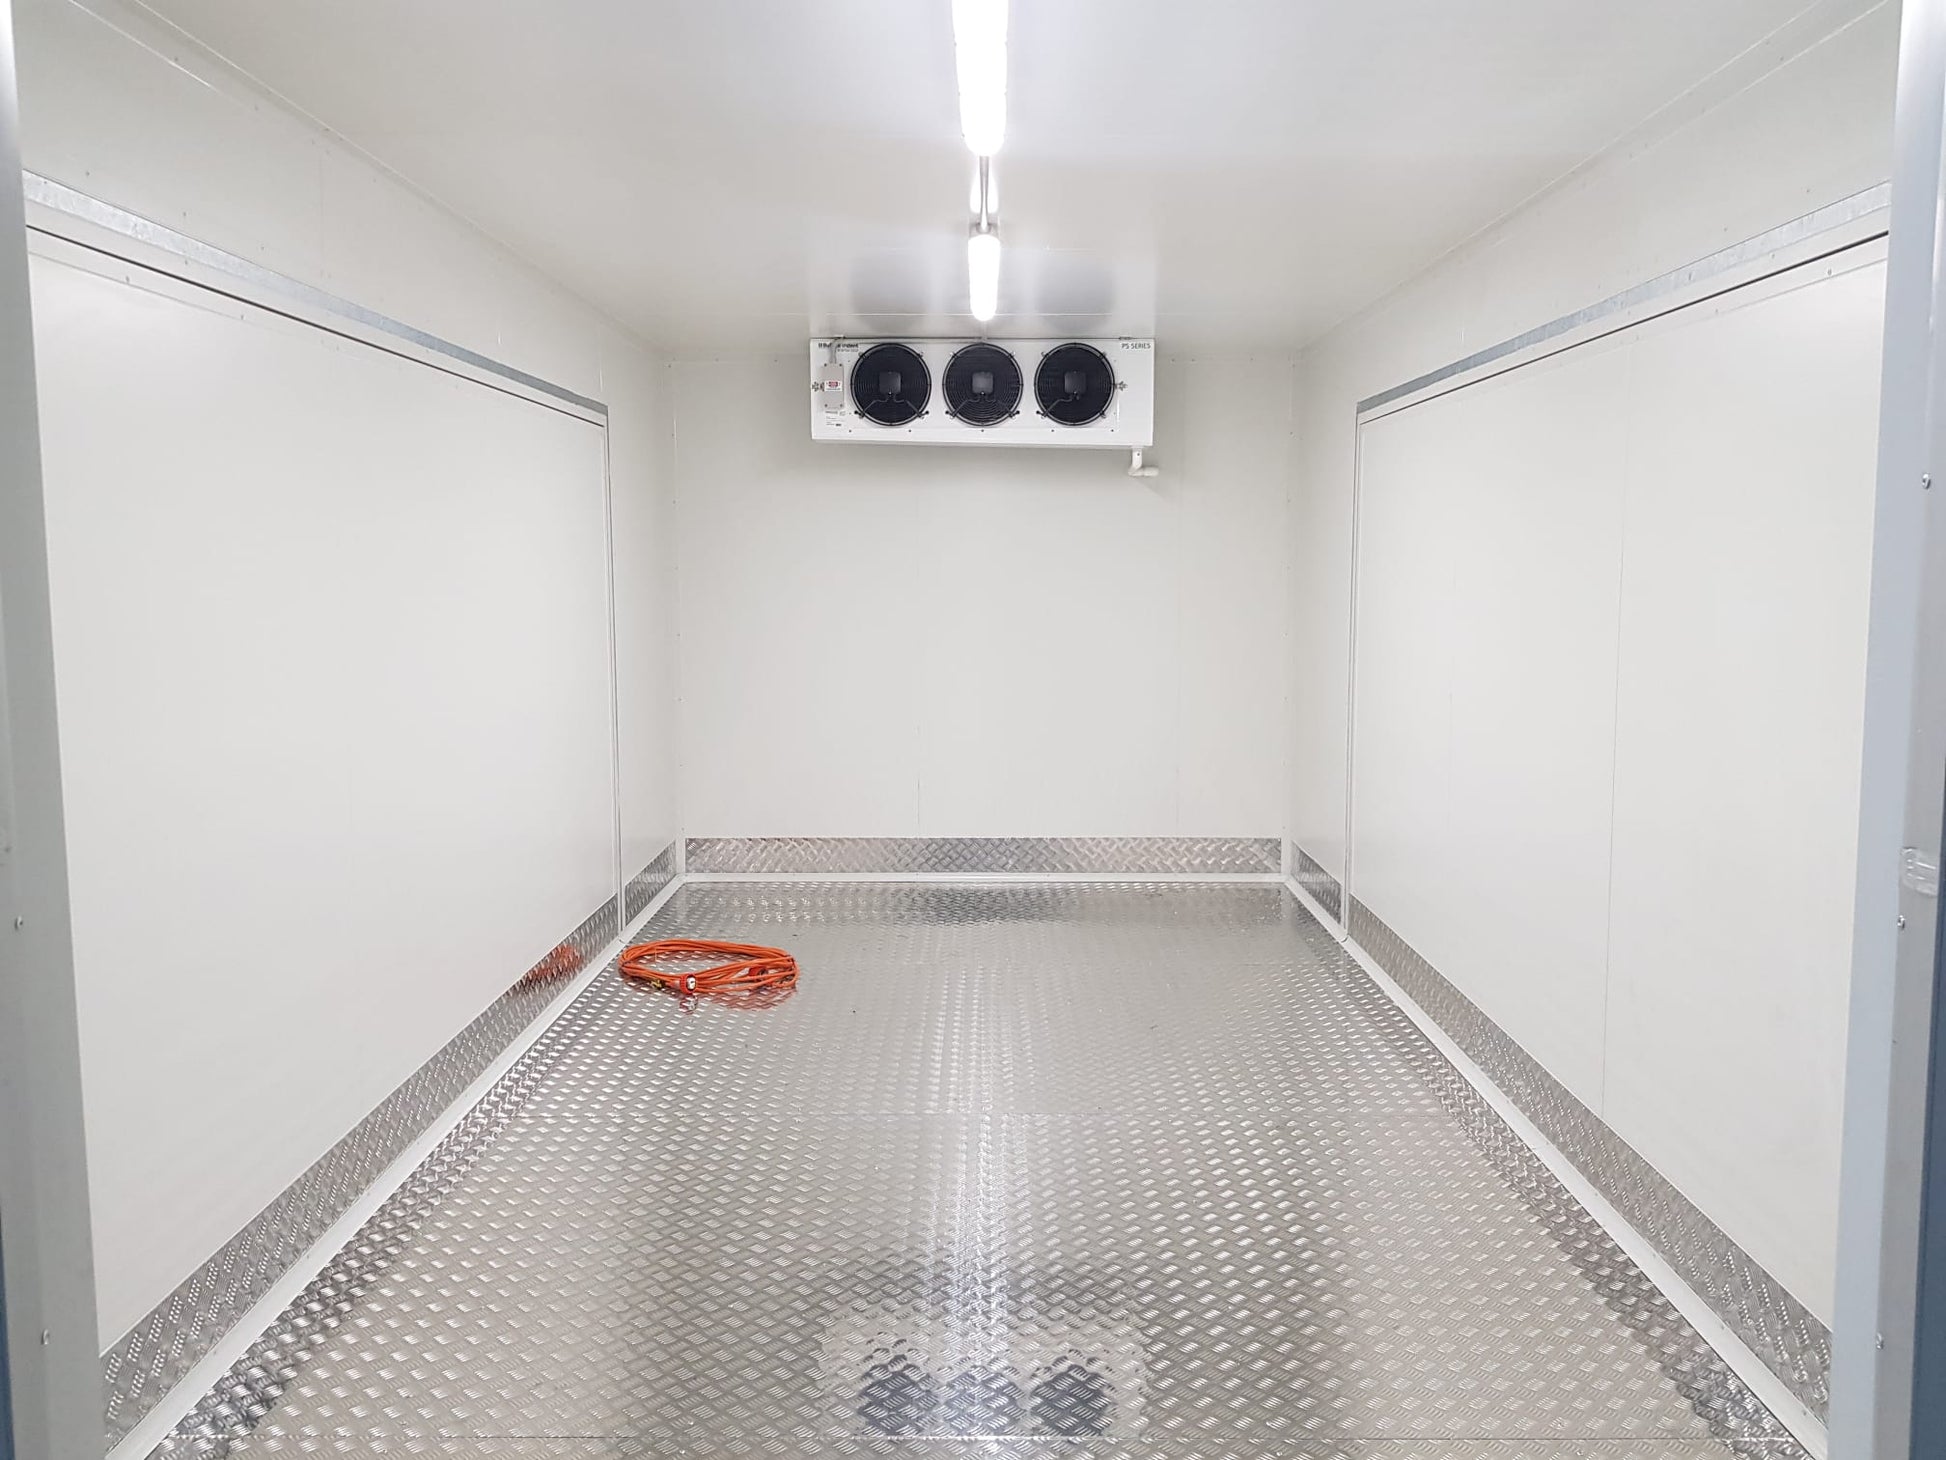 A pristine interior of a cooled truck showcasing aluminium checker plate flooring with its distinct diamond pattern. The aluminium checker plate covers the entire floor, highlighting its resilience and durability.